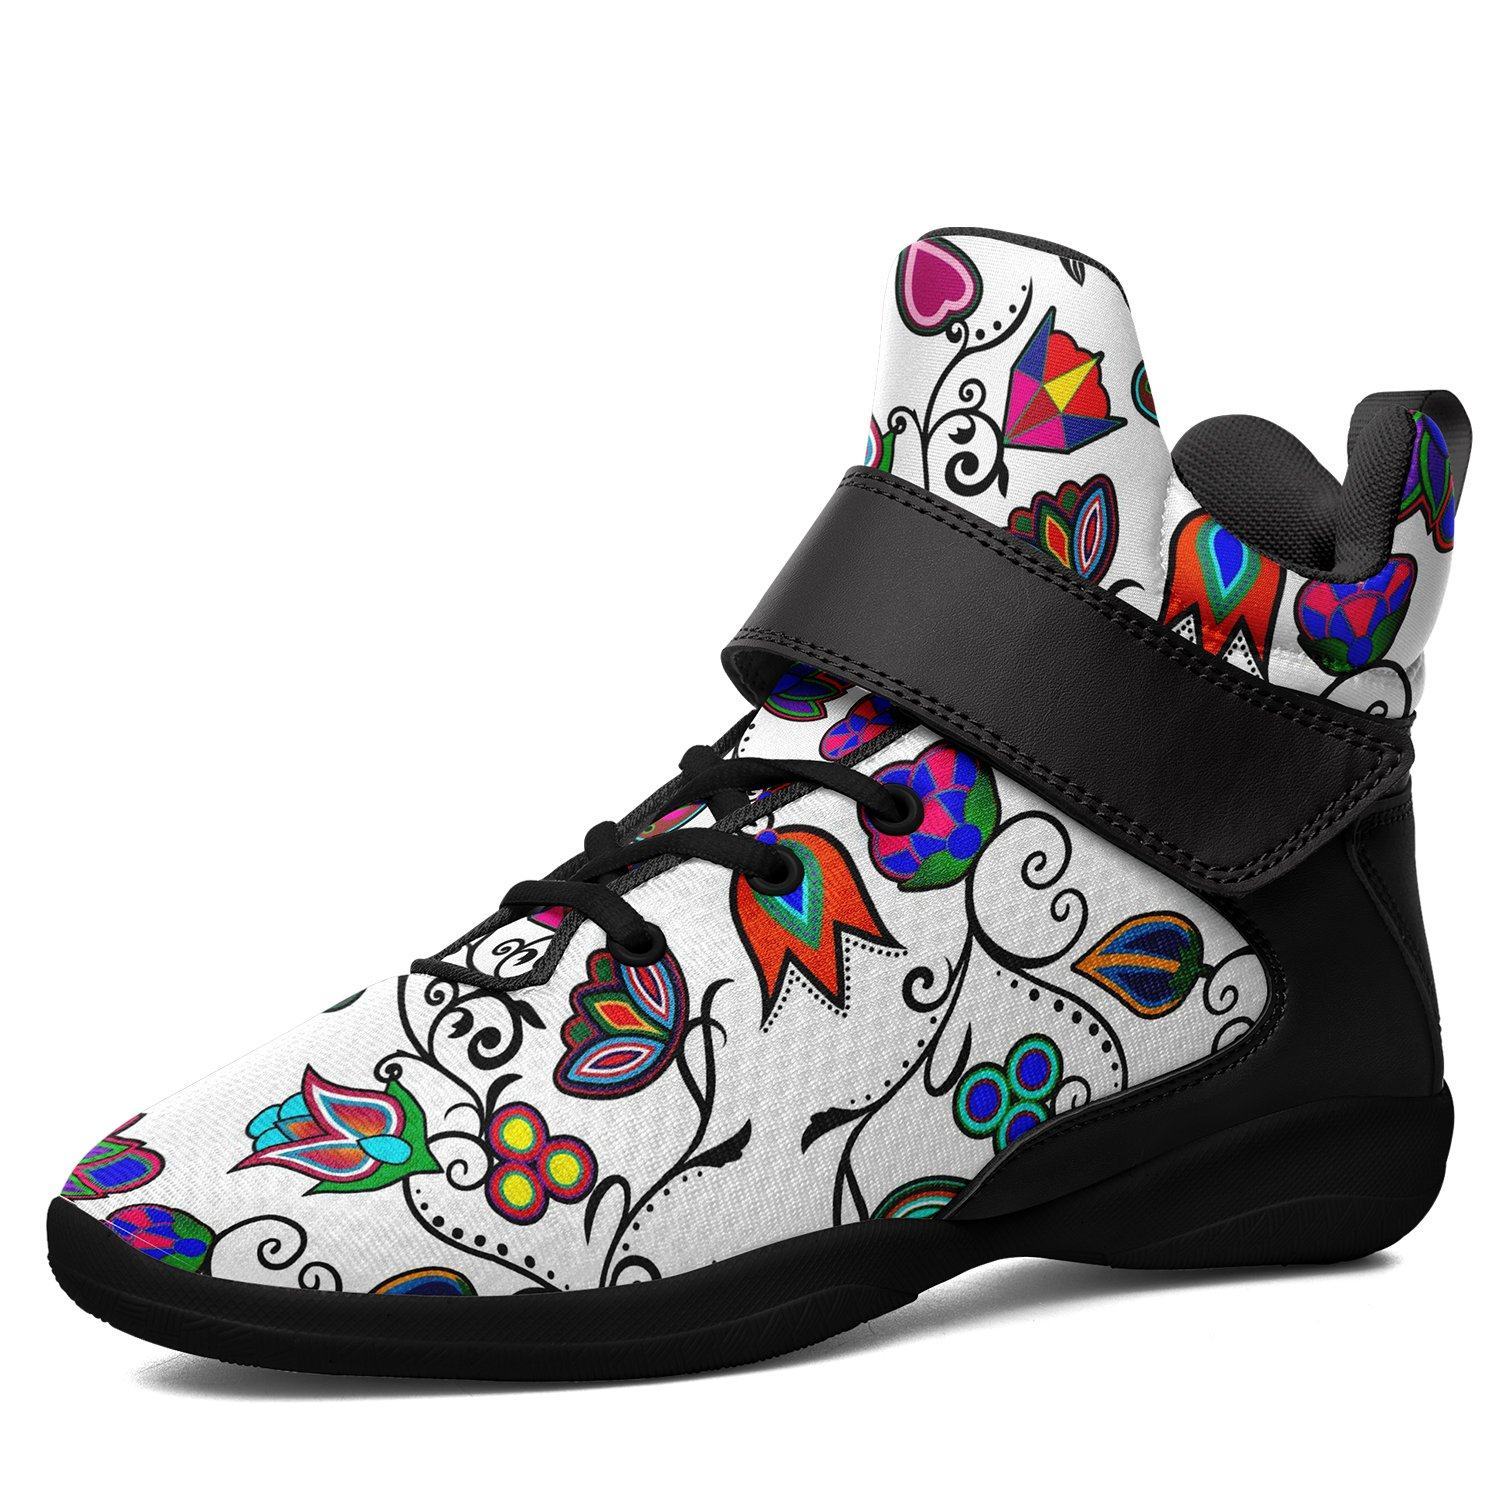 Indigenous Paisley White Ipottaa Basketball / Sport High Top Shoes - Black Sole 49 Dzine US Men 7 / EUR 40 Black Sole with Black Strap 